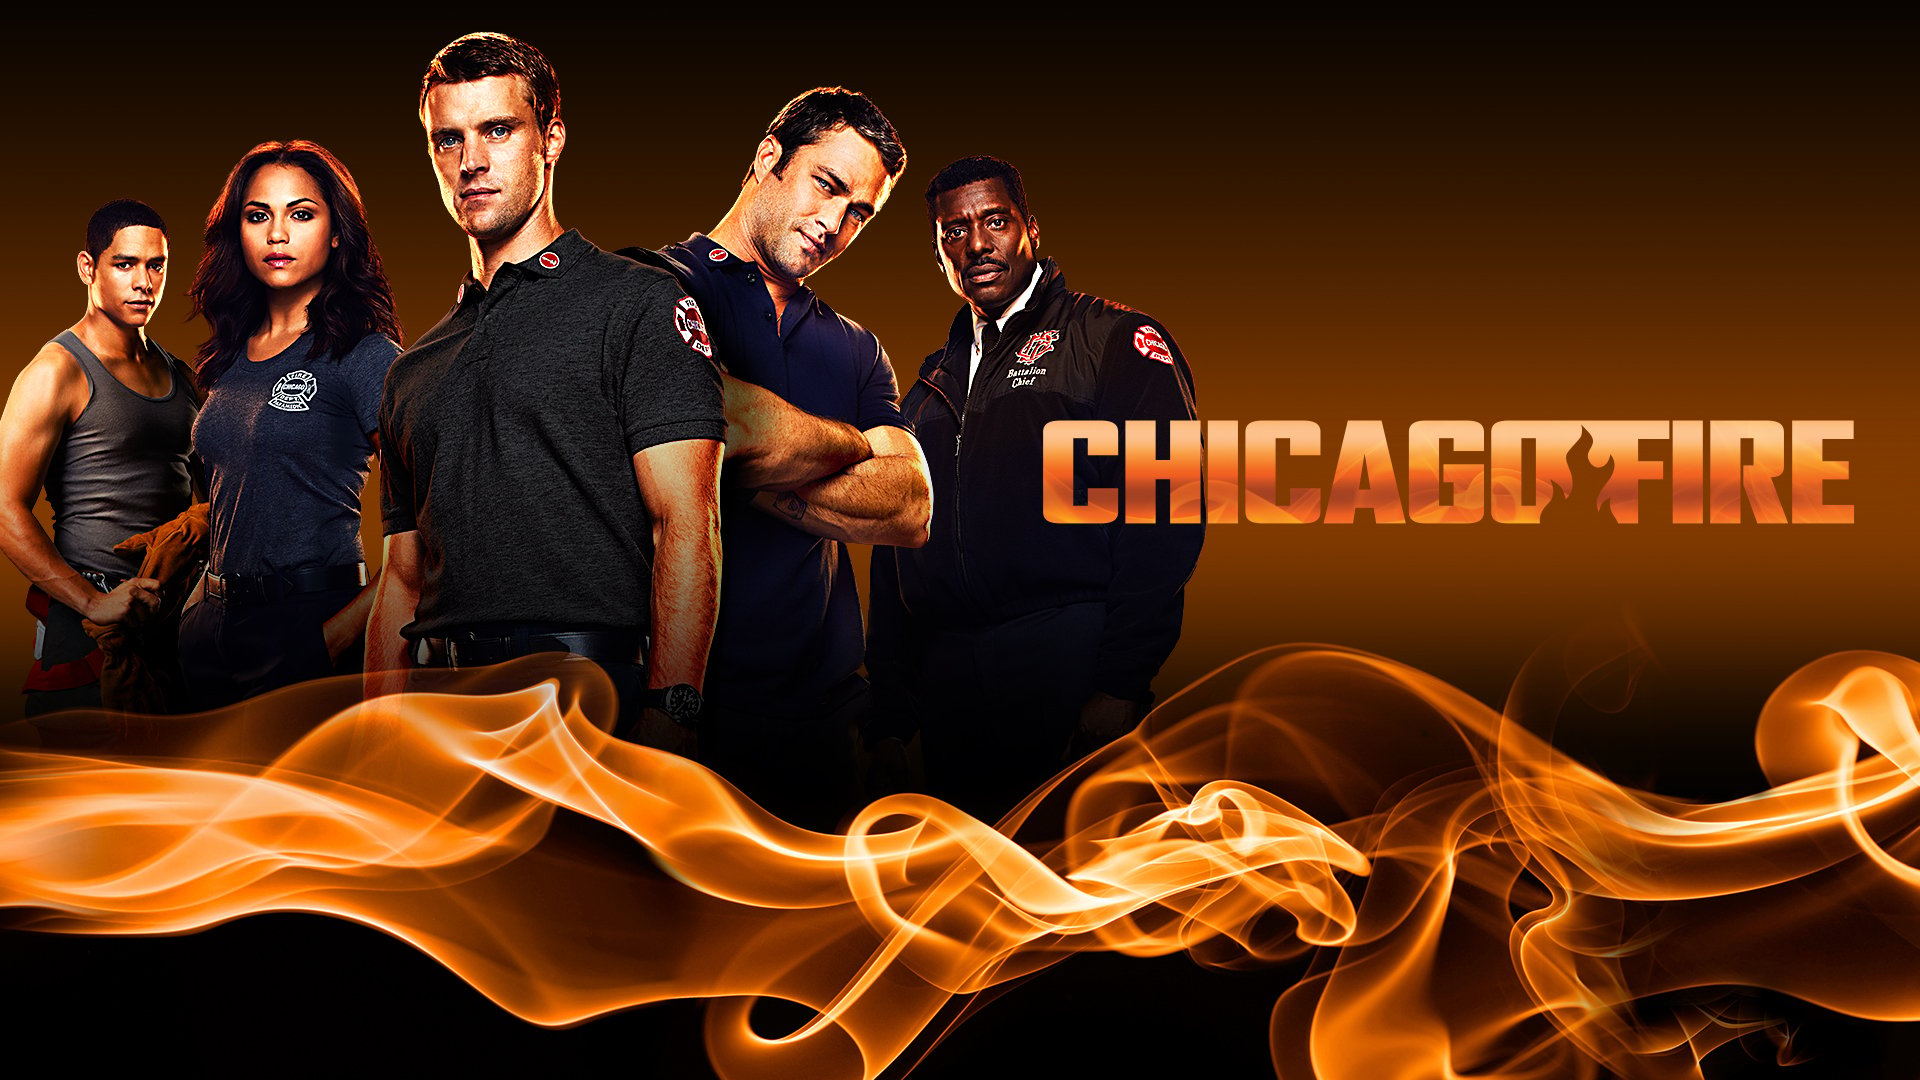 1920x1080px Chicago Fire 1316.23 KB.